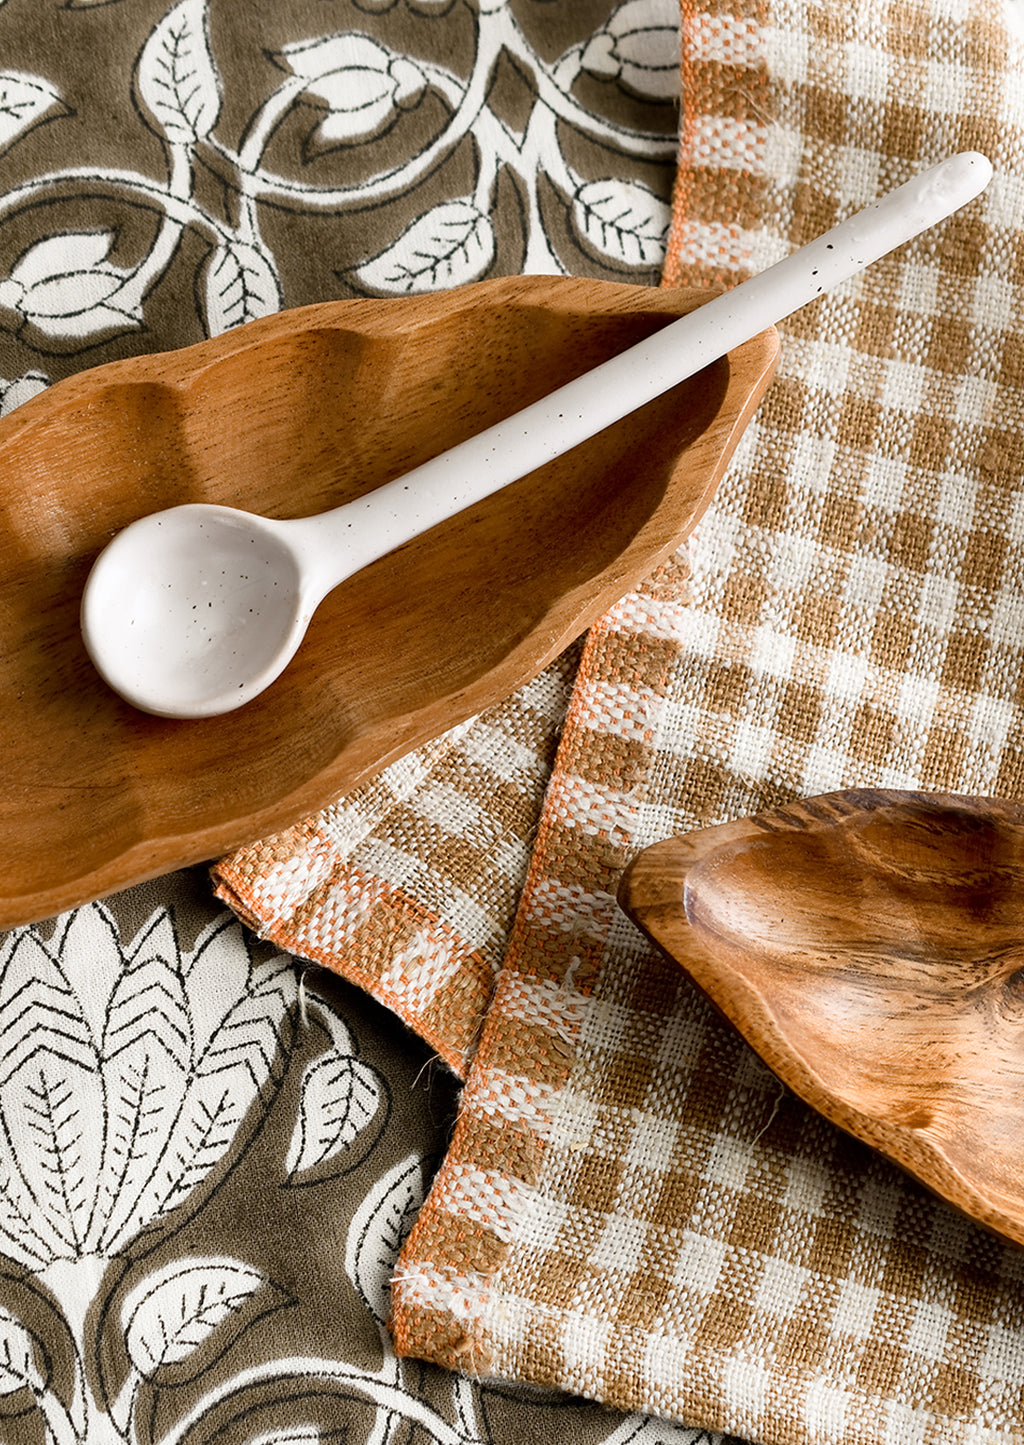 2: Wooden dishes styled with textiles and spoon.